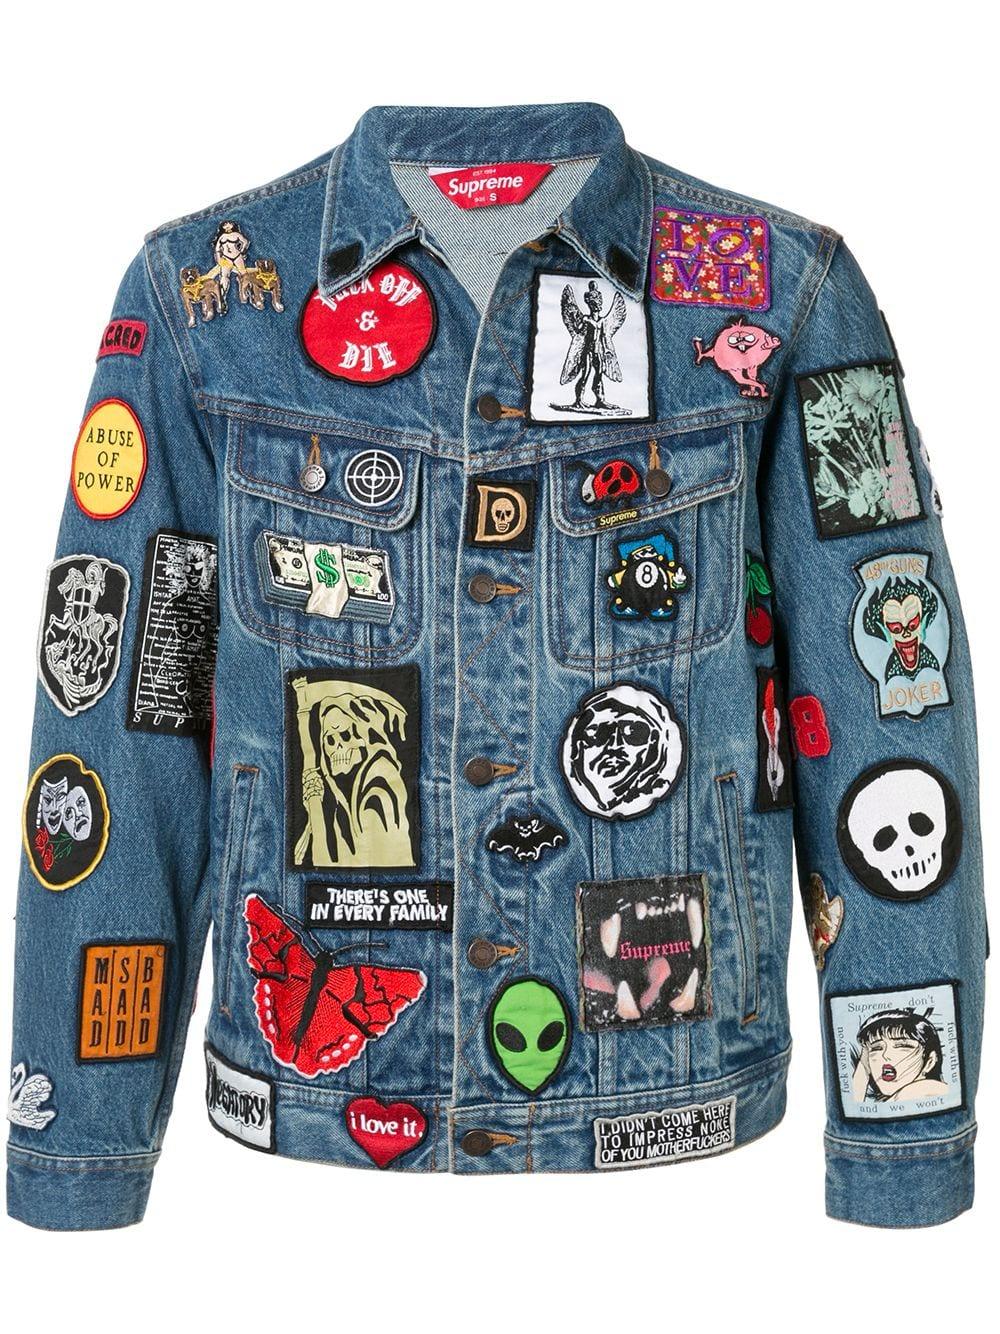 Supreme Patches Denim Trucker Jacket Ss18 in Blue for Men - Lyst